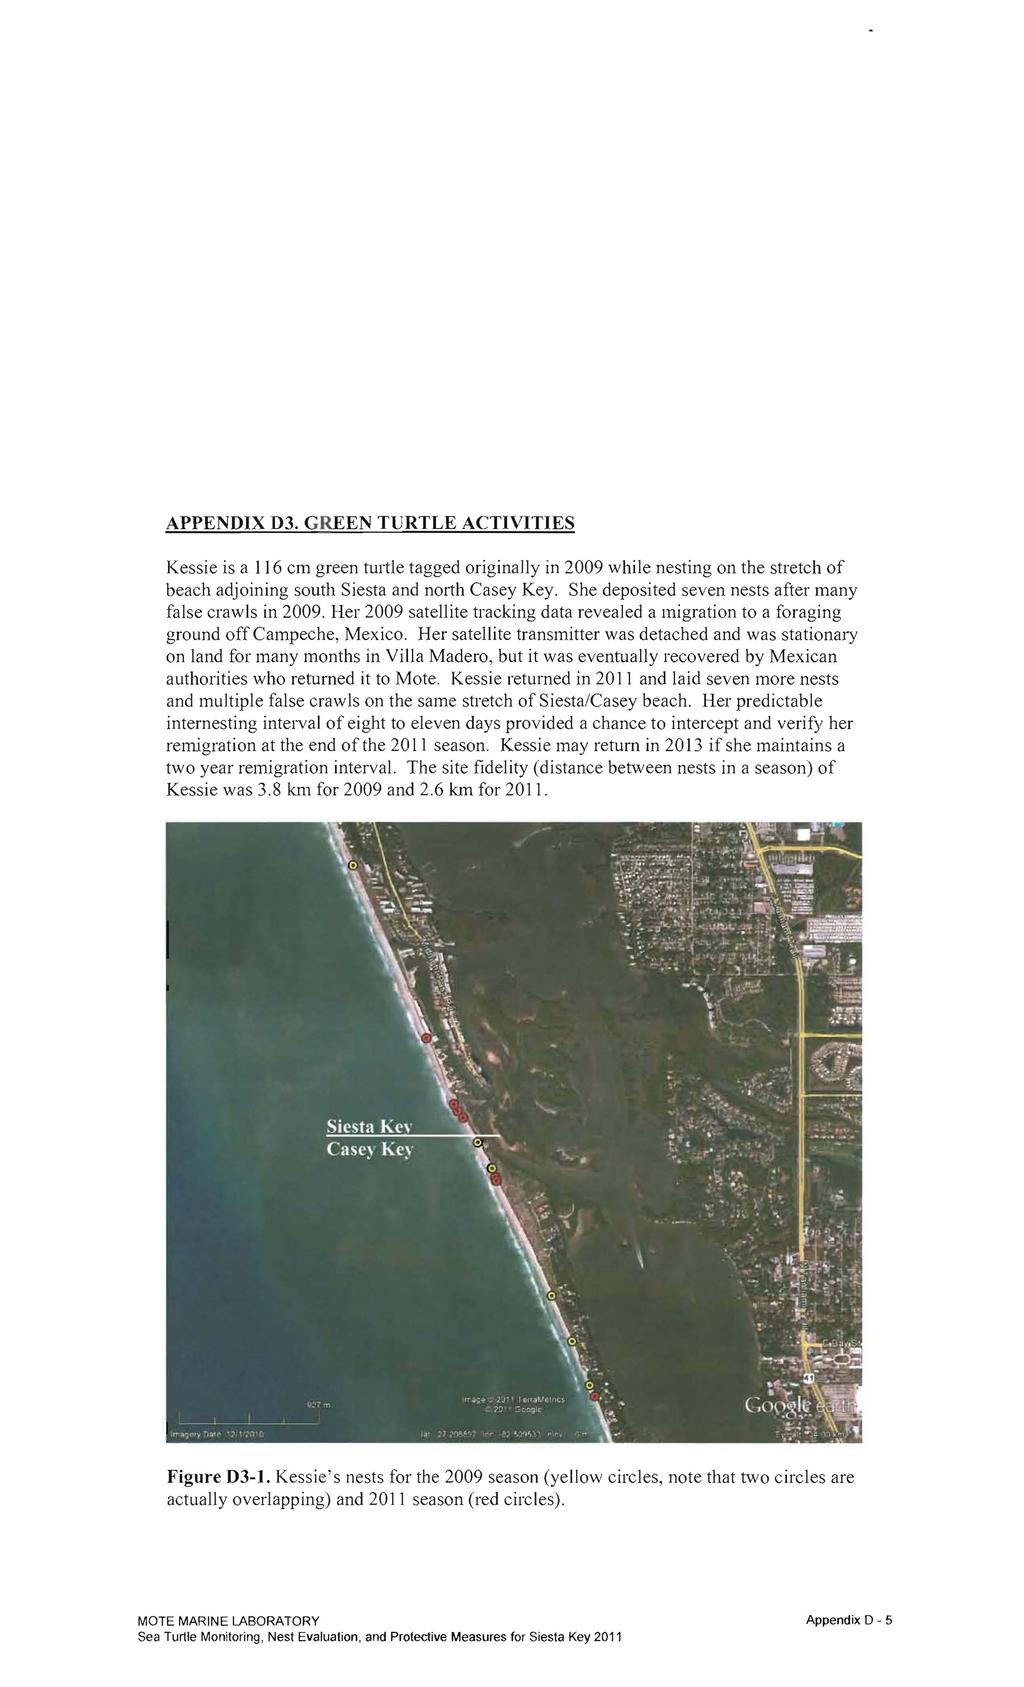 APPENDIX 03. GREEN TURTLE ACTIVITIES Kessie is a 116 cm green turtle tagged riginally in 2009 while nesting n the stretch f beach adjining suth Siesta and nrth Casey Key.